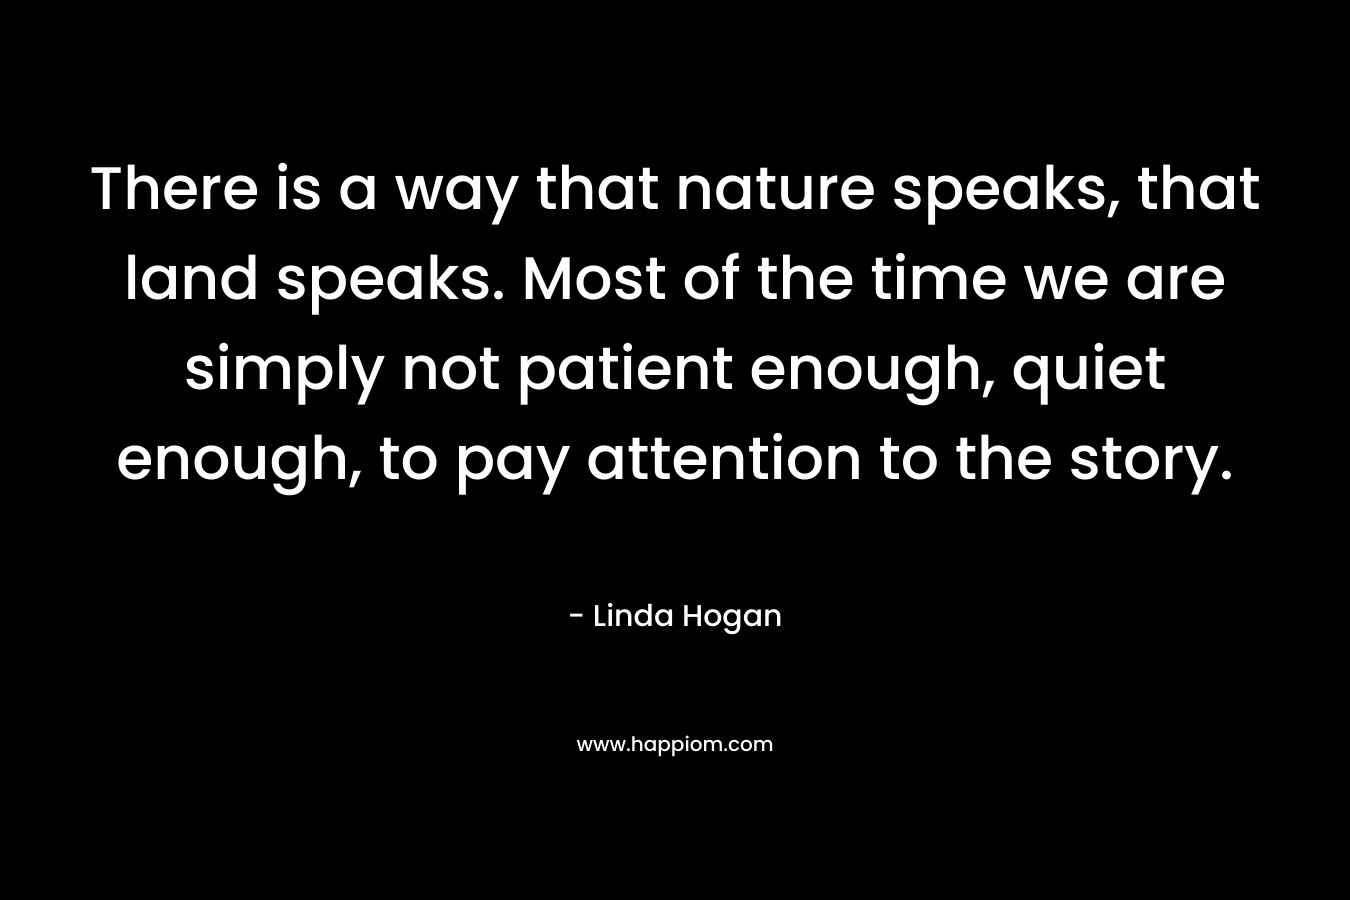 There is a way that nature speaks, that land speaks. Most of the time we are simply not patient enough, quiet enough, to pay attention to the story. – Linda Hogan